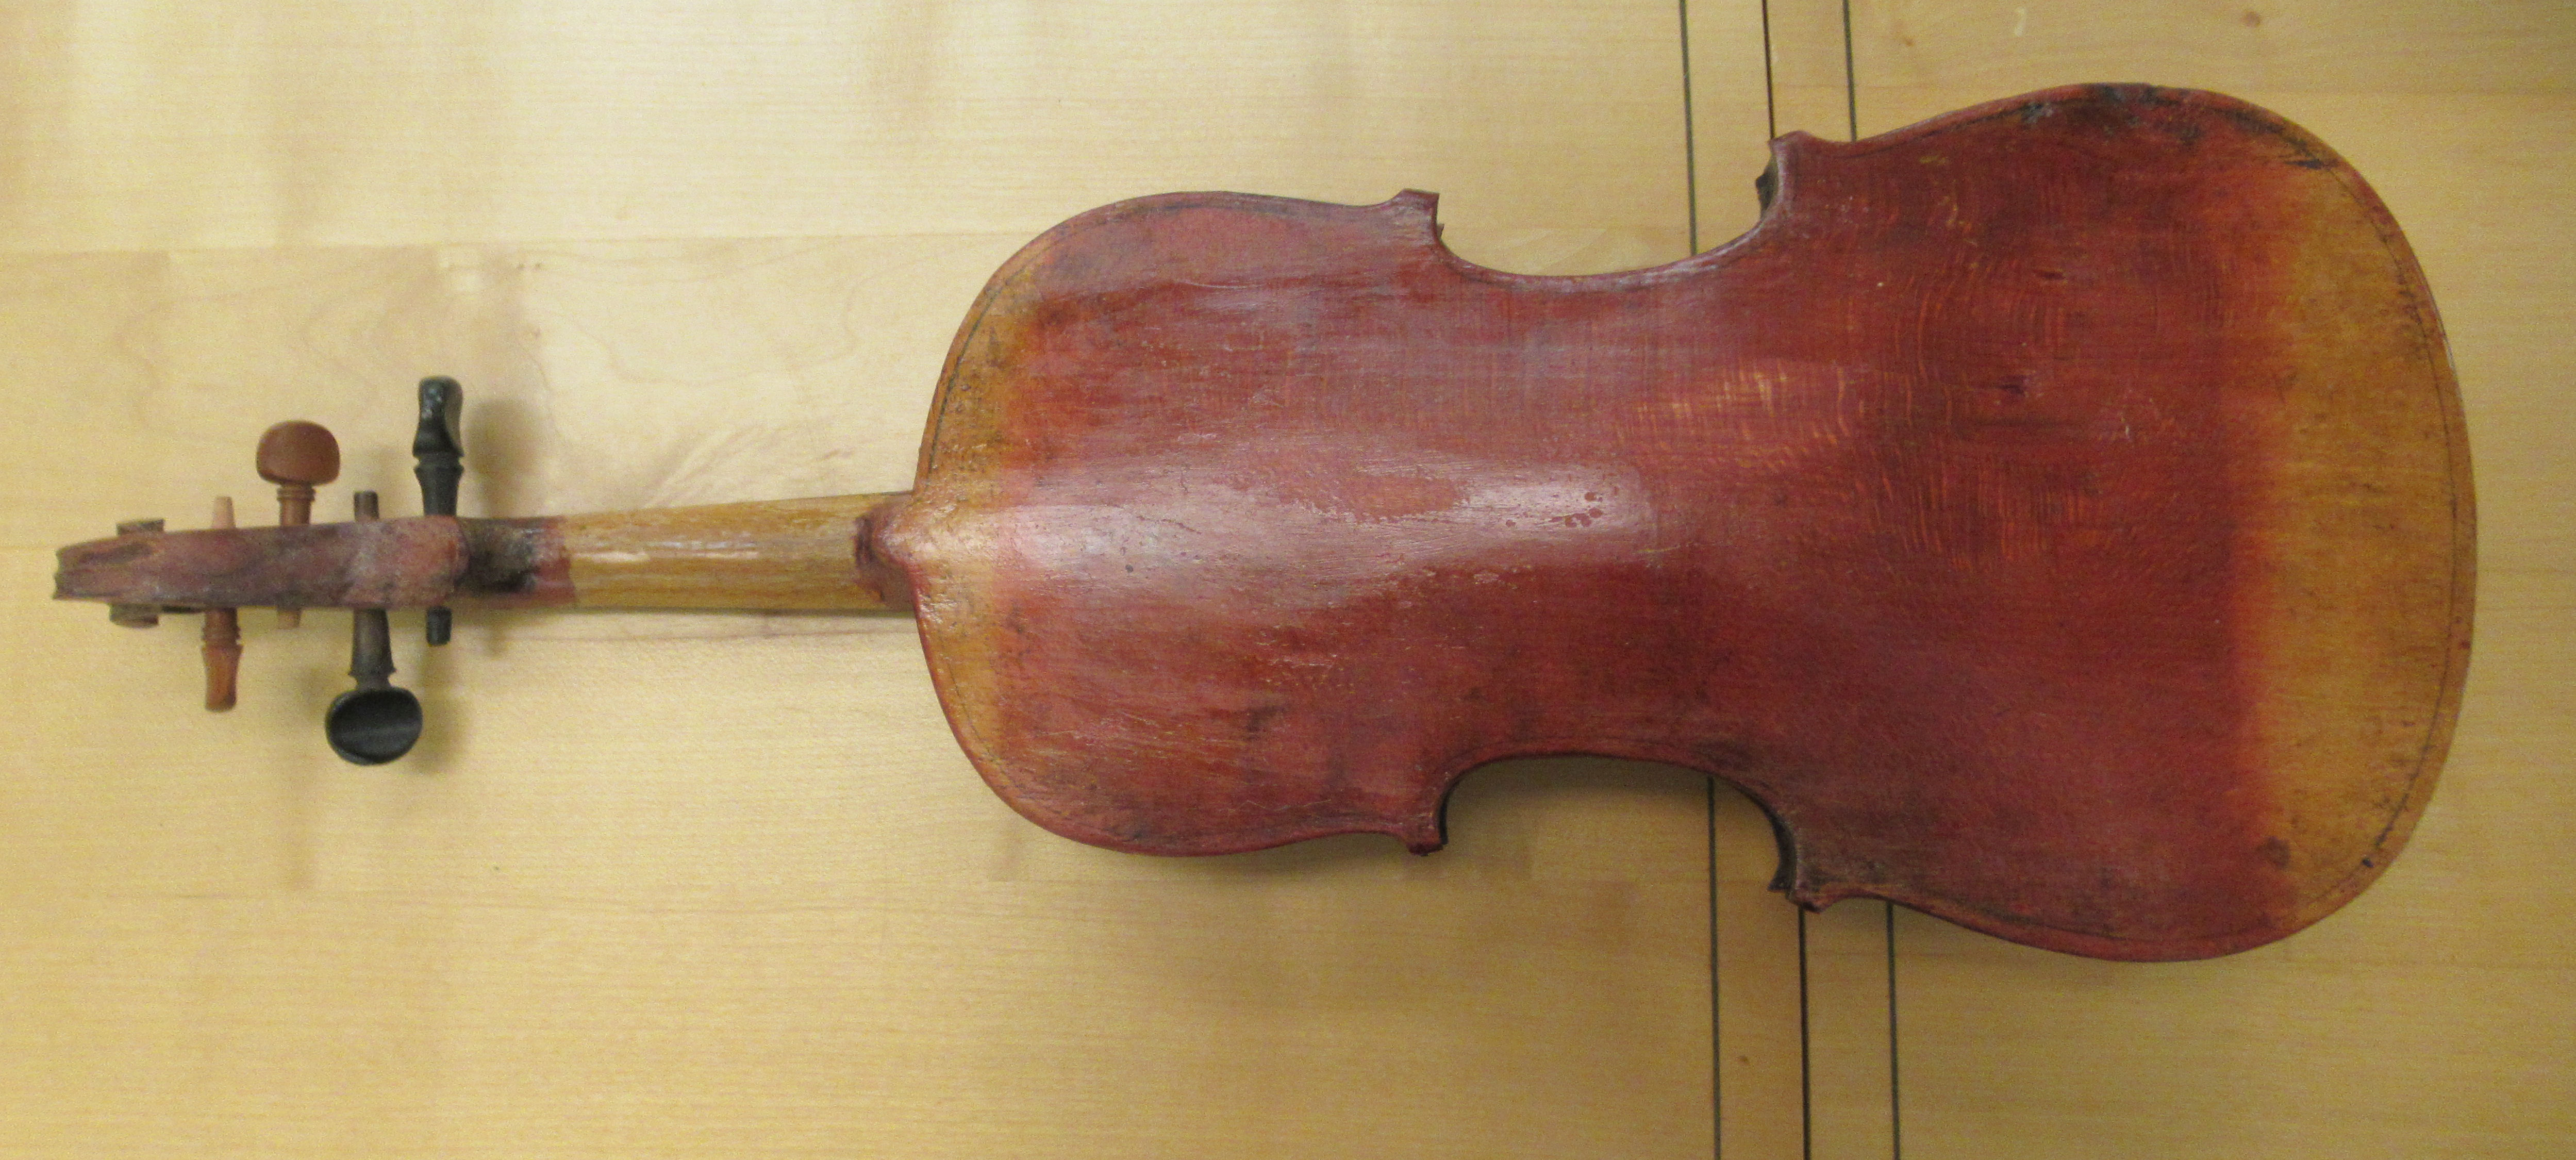 Three 19th/20thC violins, one with a one piece back  14"L; the others with two piece backs  13" - Image 3 of 16